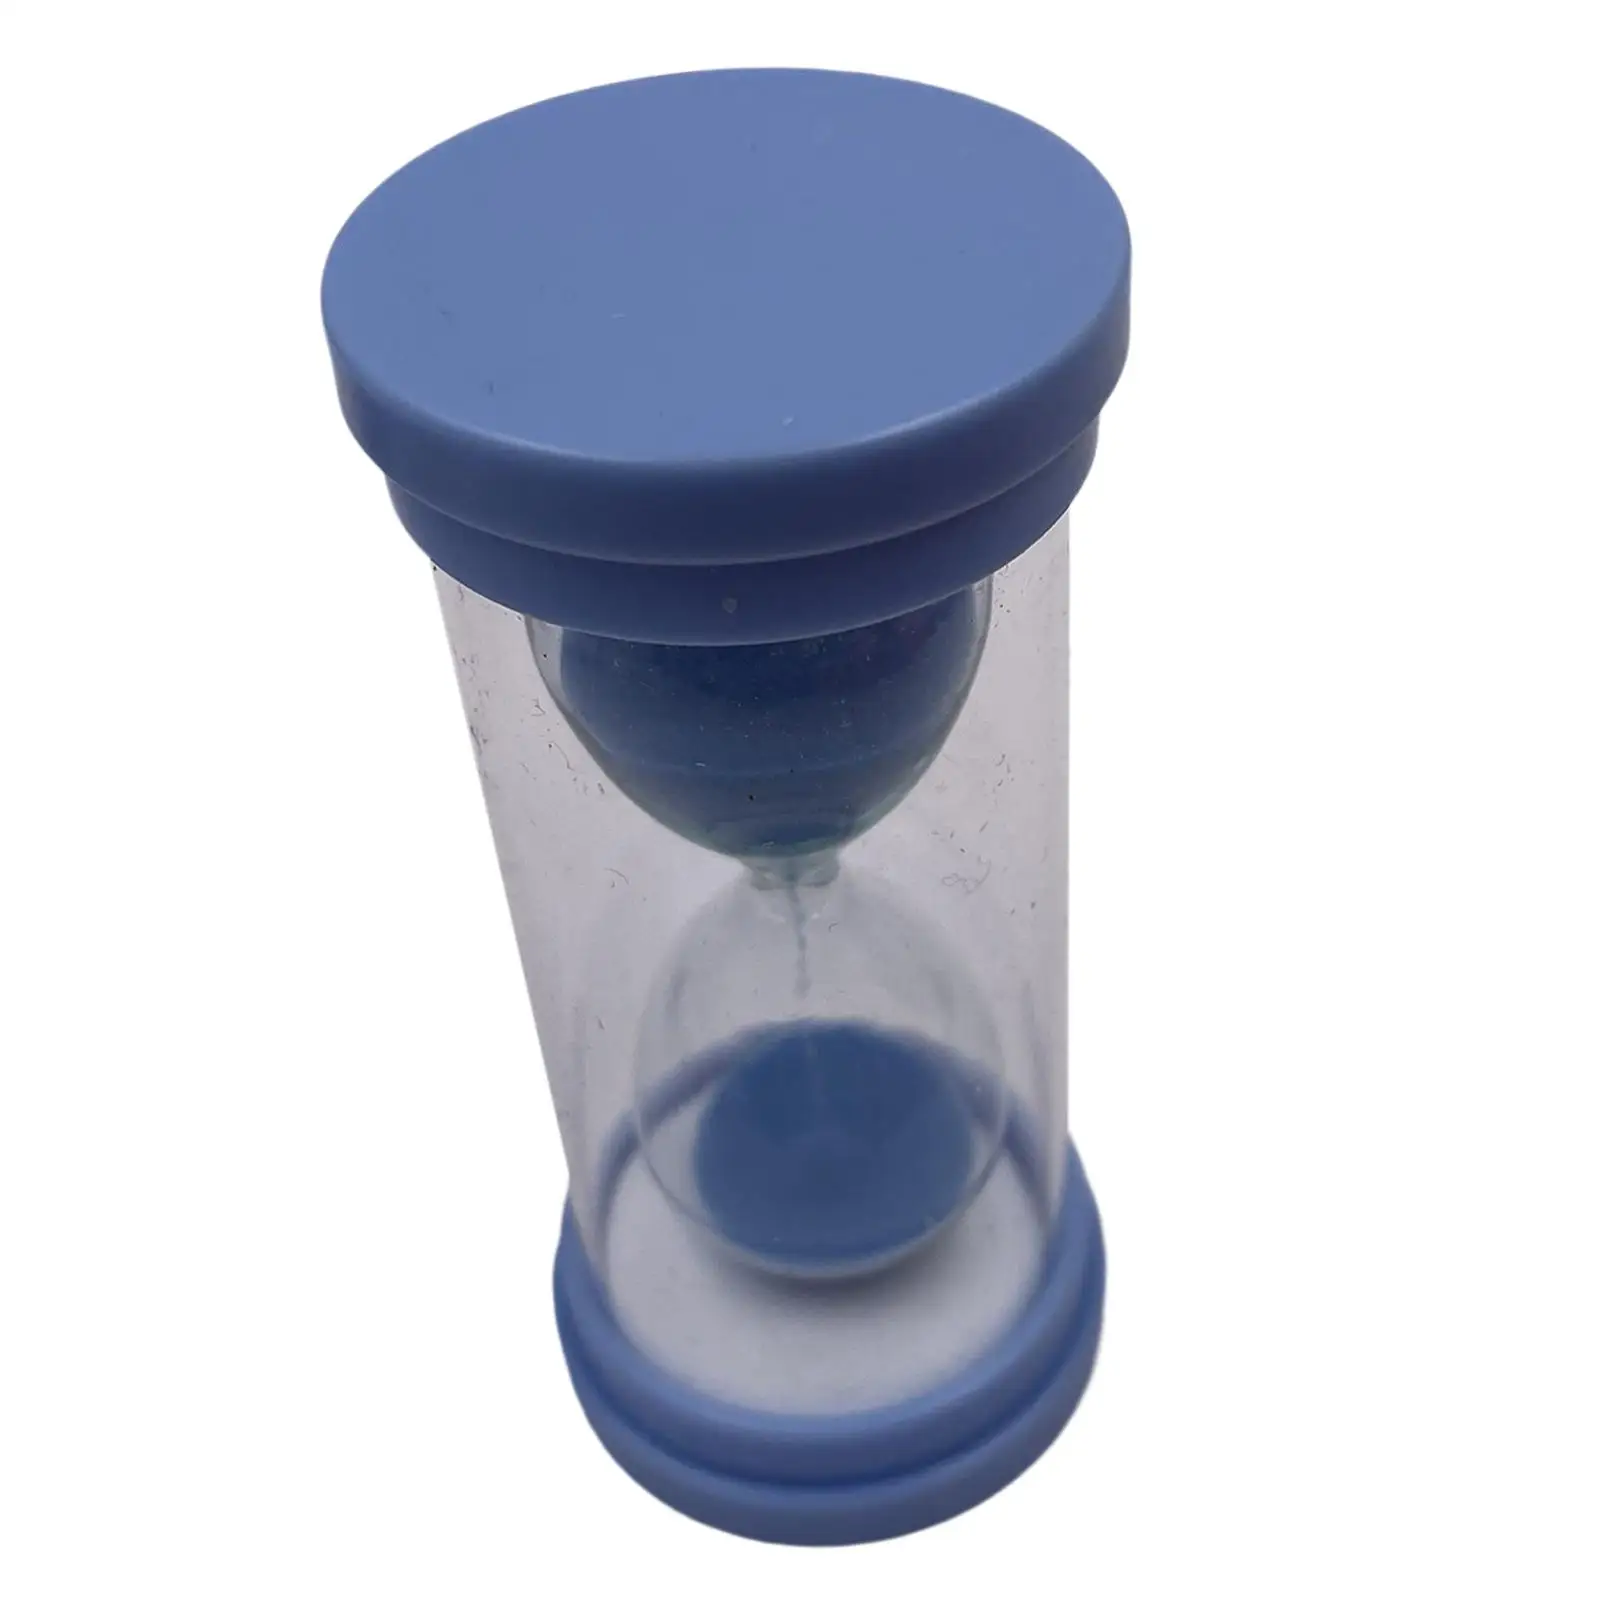 3/5/10 Minutes Sand Clock Sandglass Hourglass Sand Timer for Home Decoration Kitchen Cooking Classroom Activity School